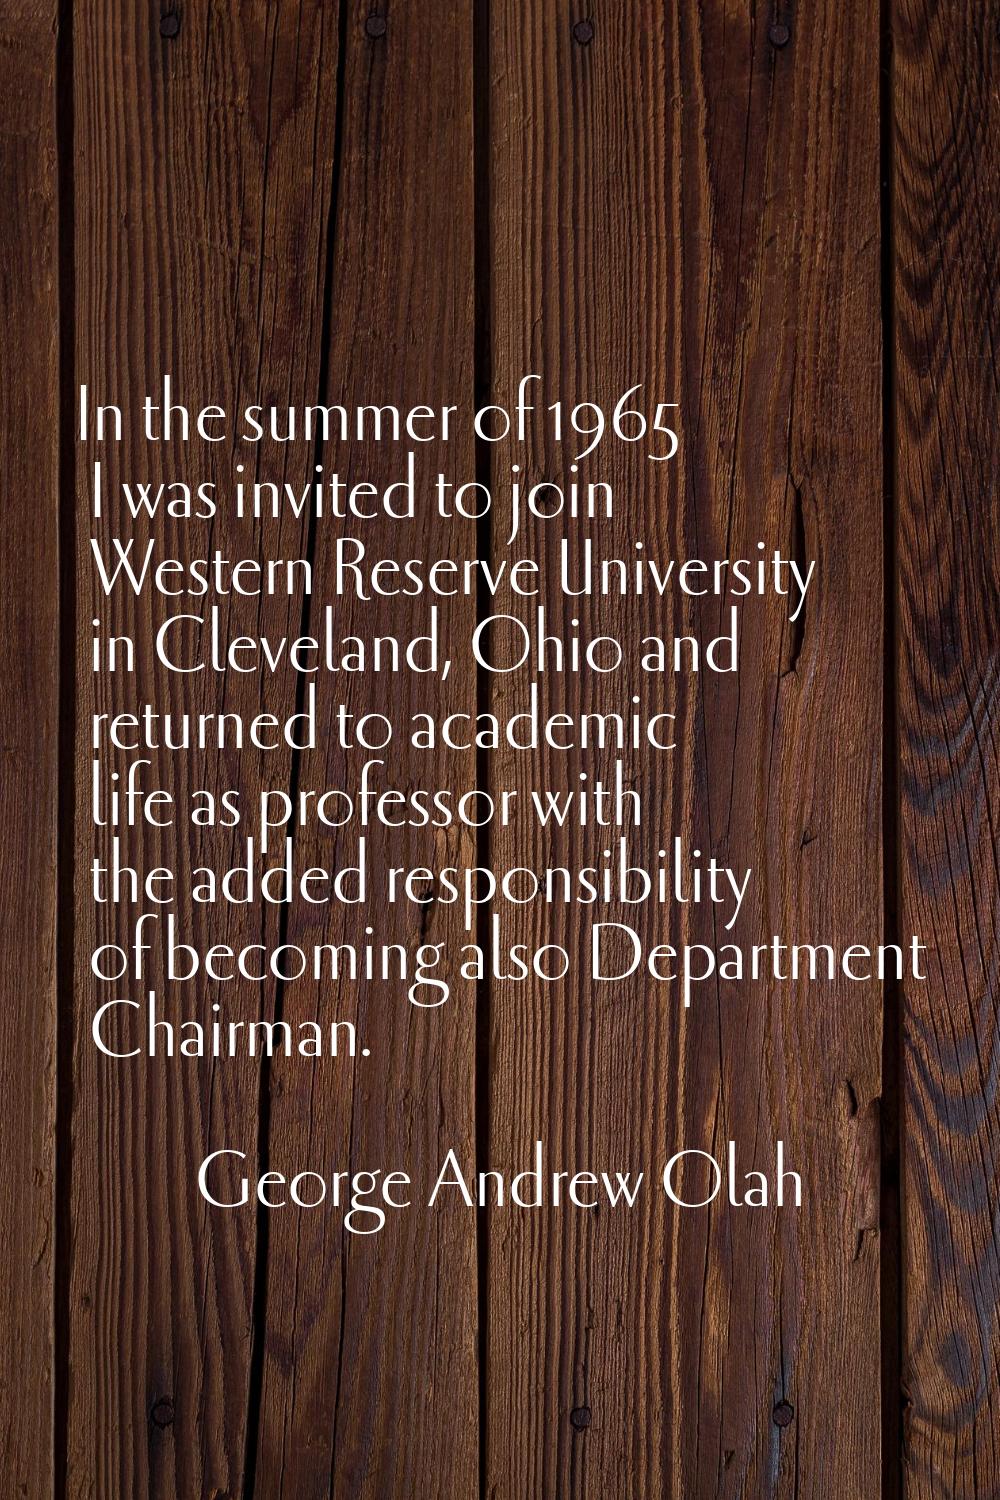 In the summer of 1965 I was invited to join Western Reserve University in Cleveland, Ohio and retur